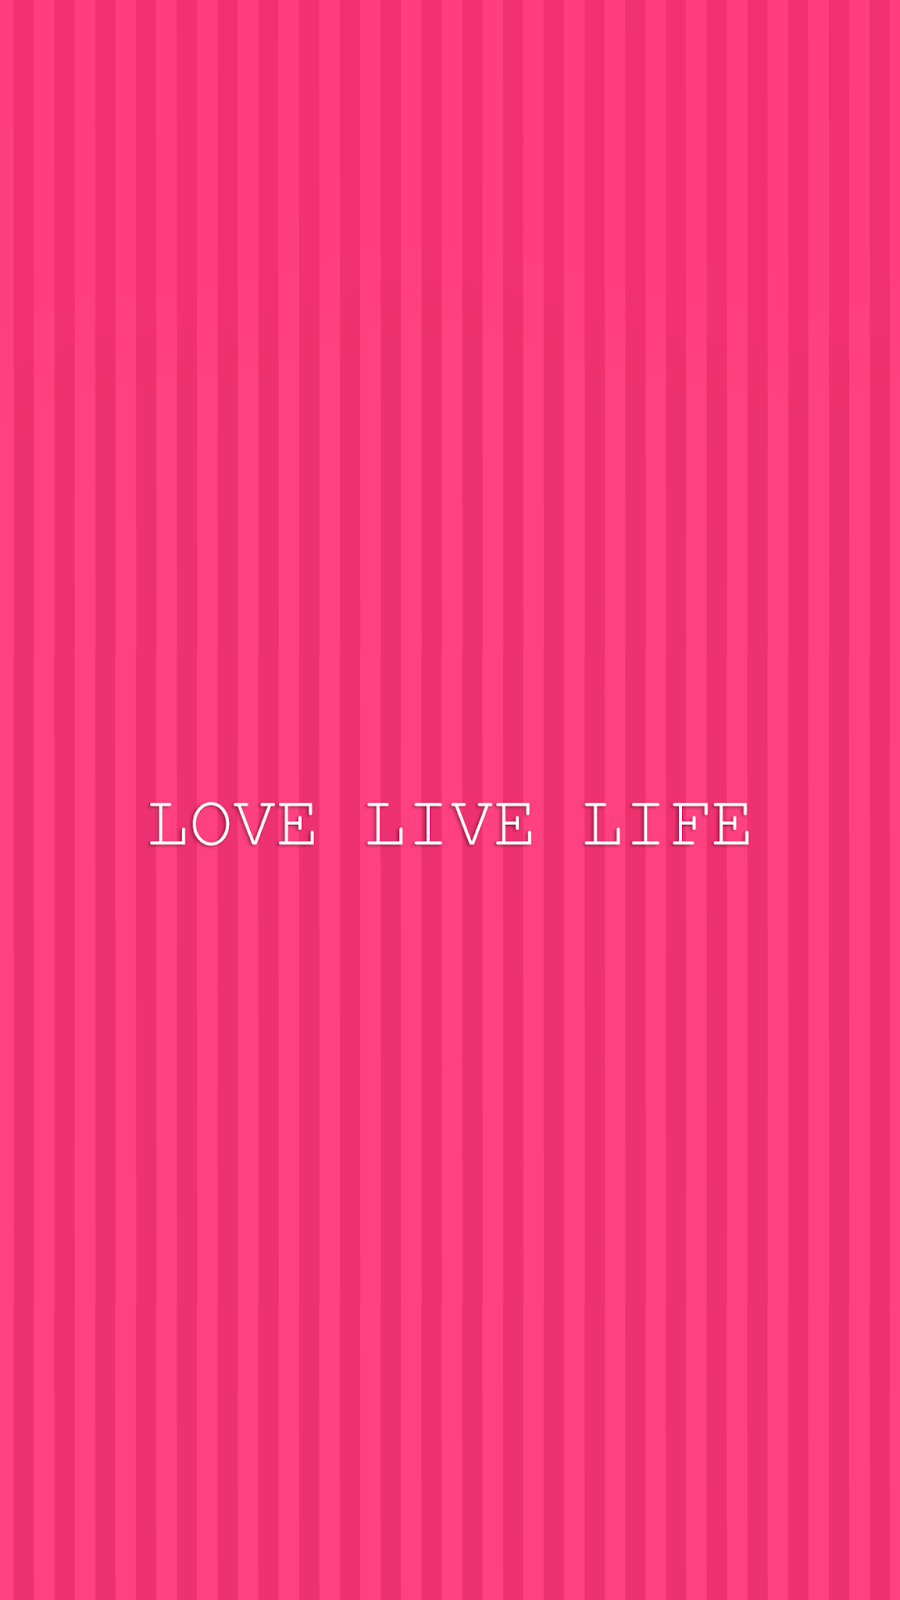 wallpaper, background, hd, iphone, love, life, live, pink. Love pink wallpaper, I love pink wallpaper, Cute wallpaper for phone